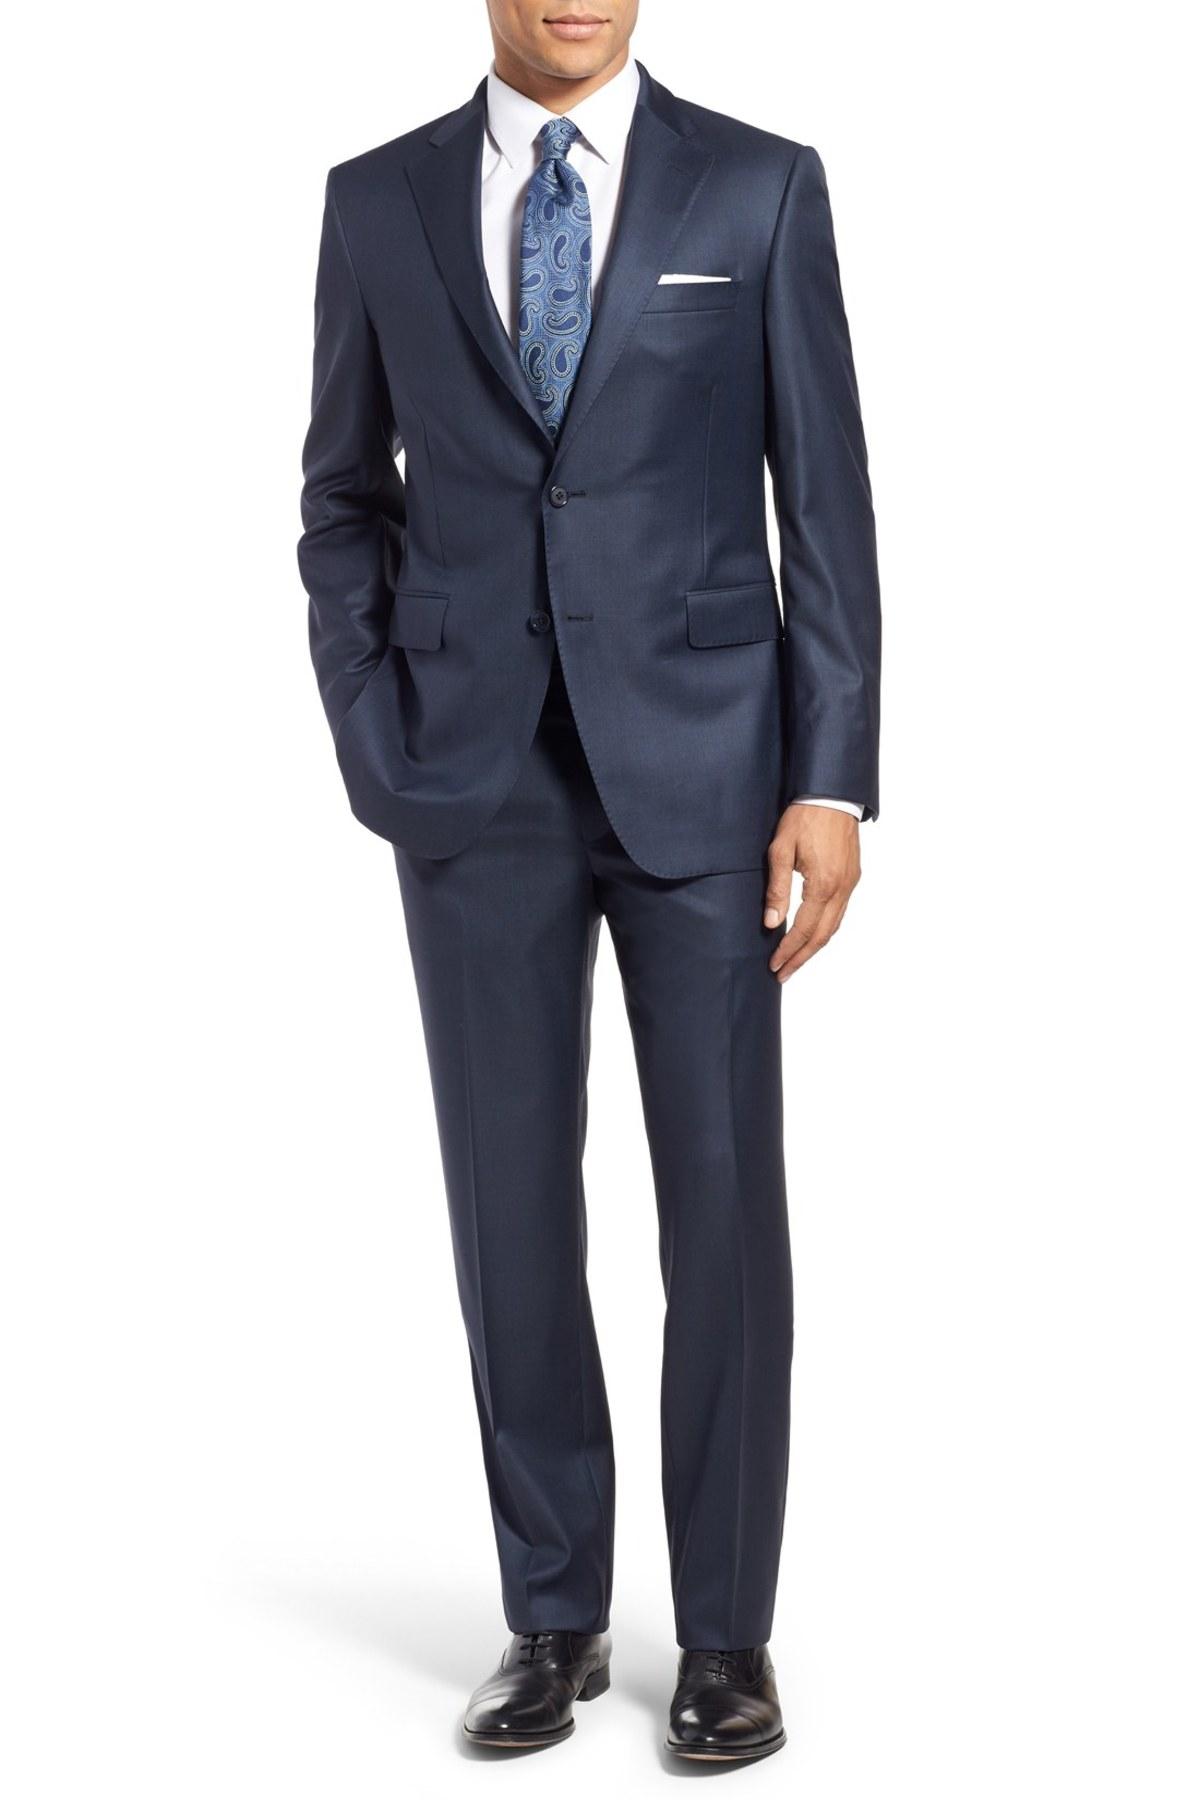 Lyst - Samuelsohn Beckett Classic Fit Solid Wool Suit in Blue for Men